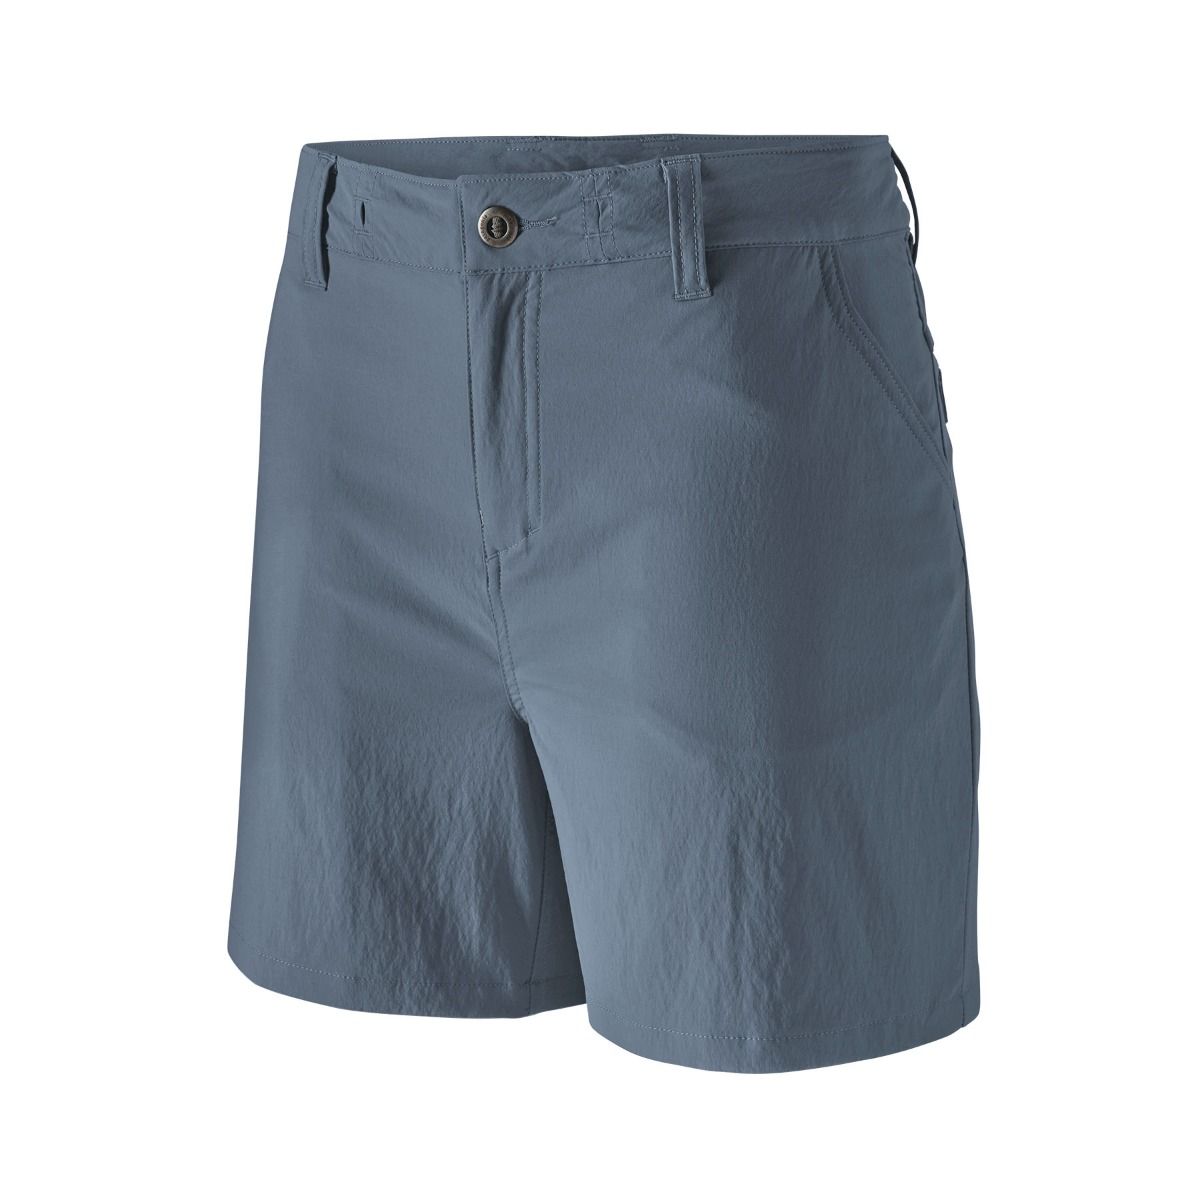 Patagonia - W's Quandary Shorts - 5 in